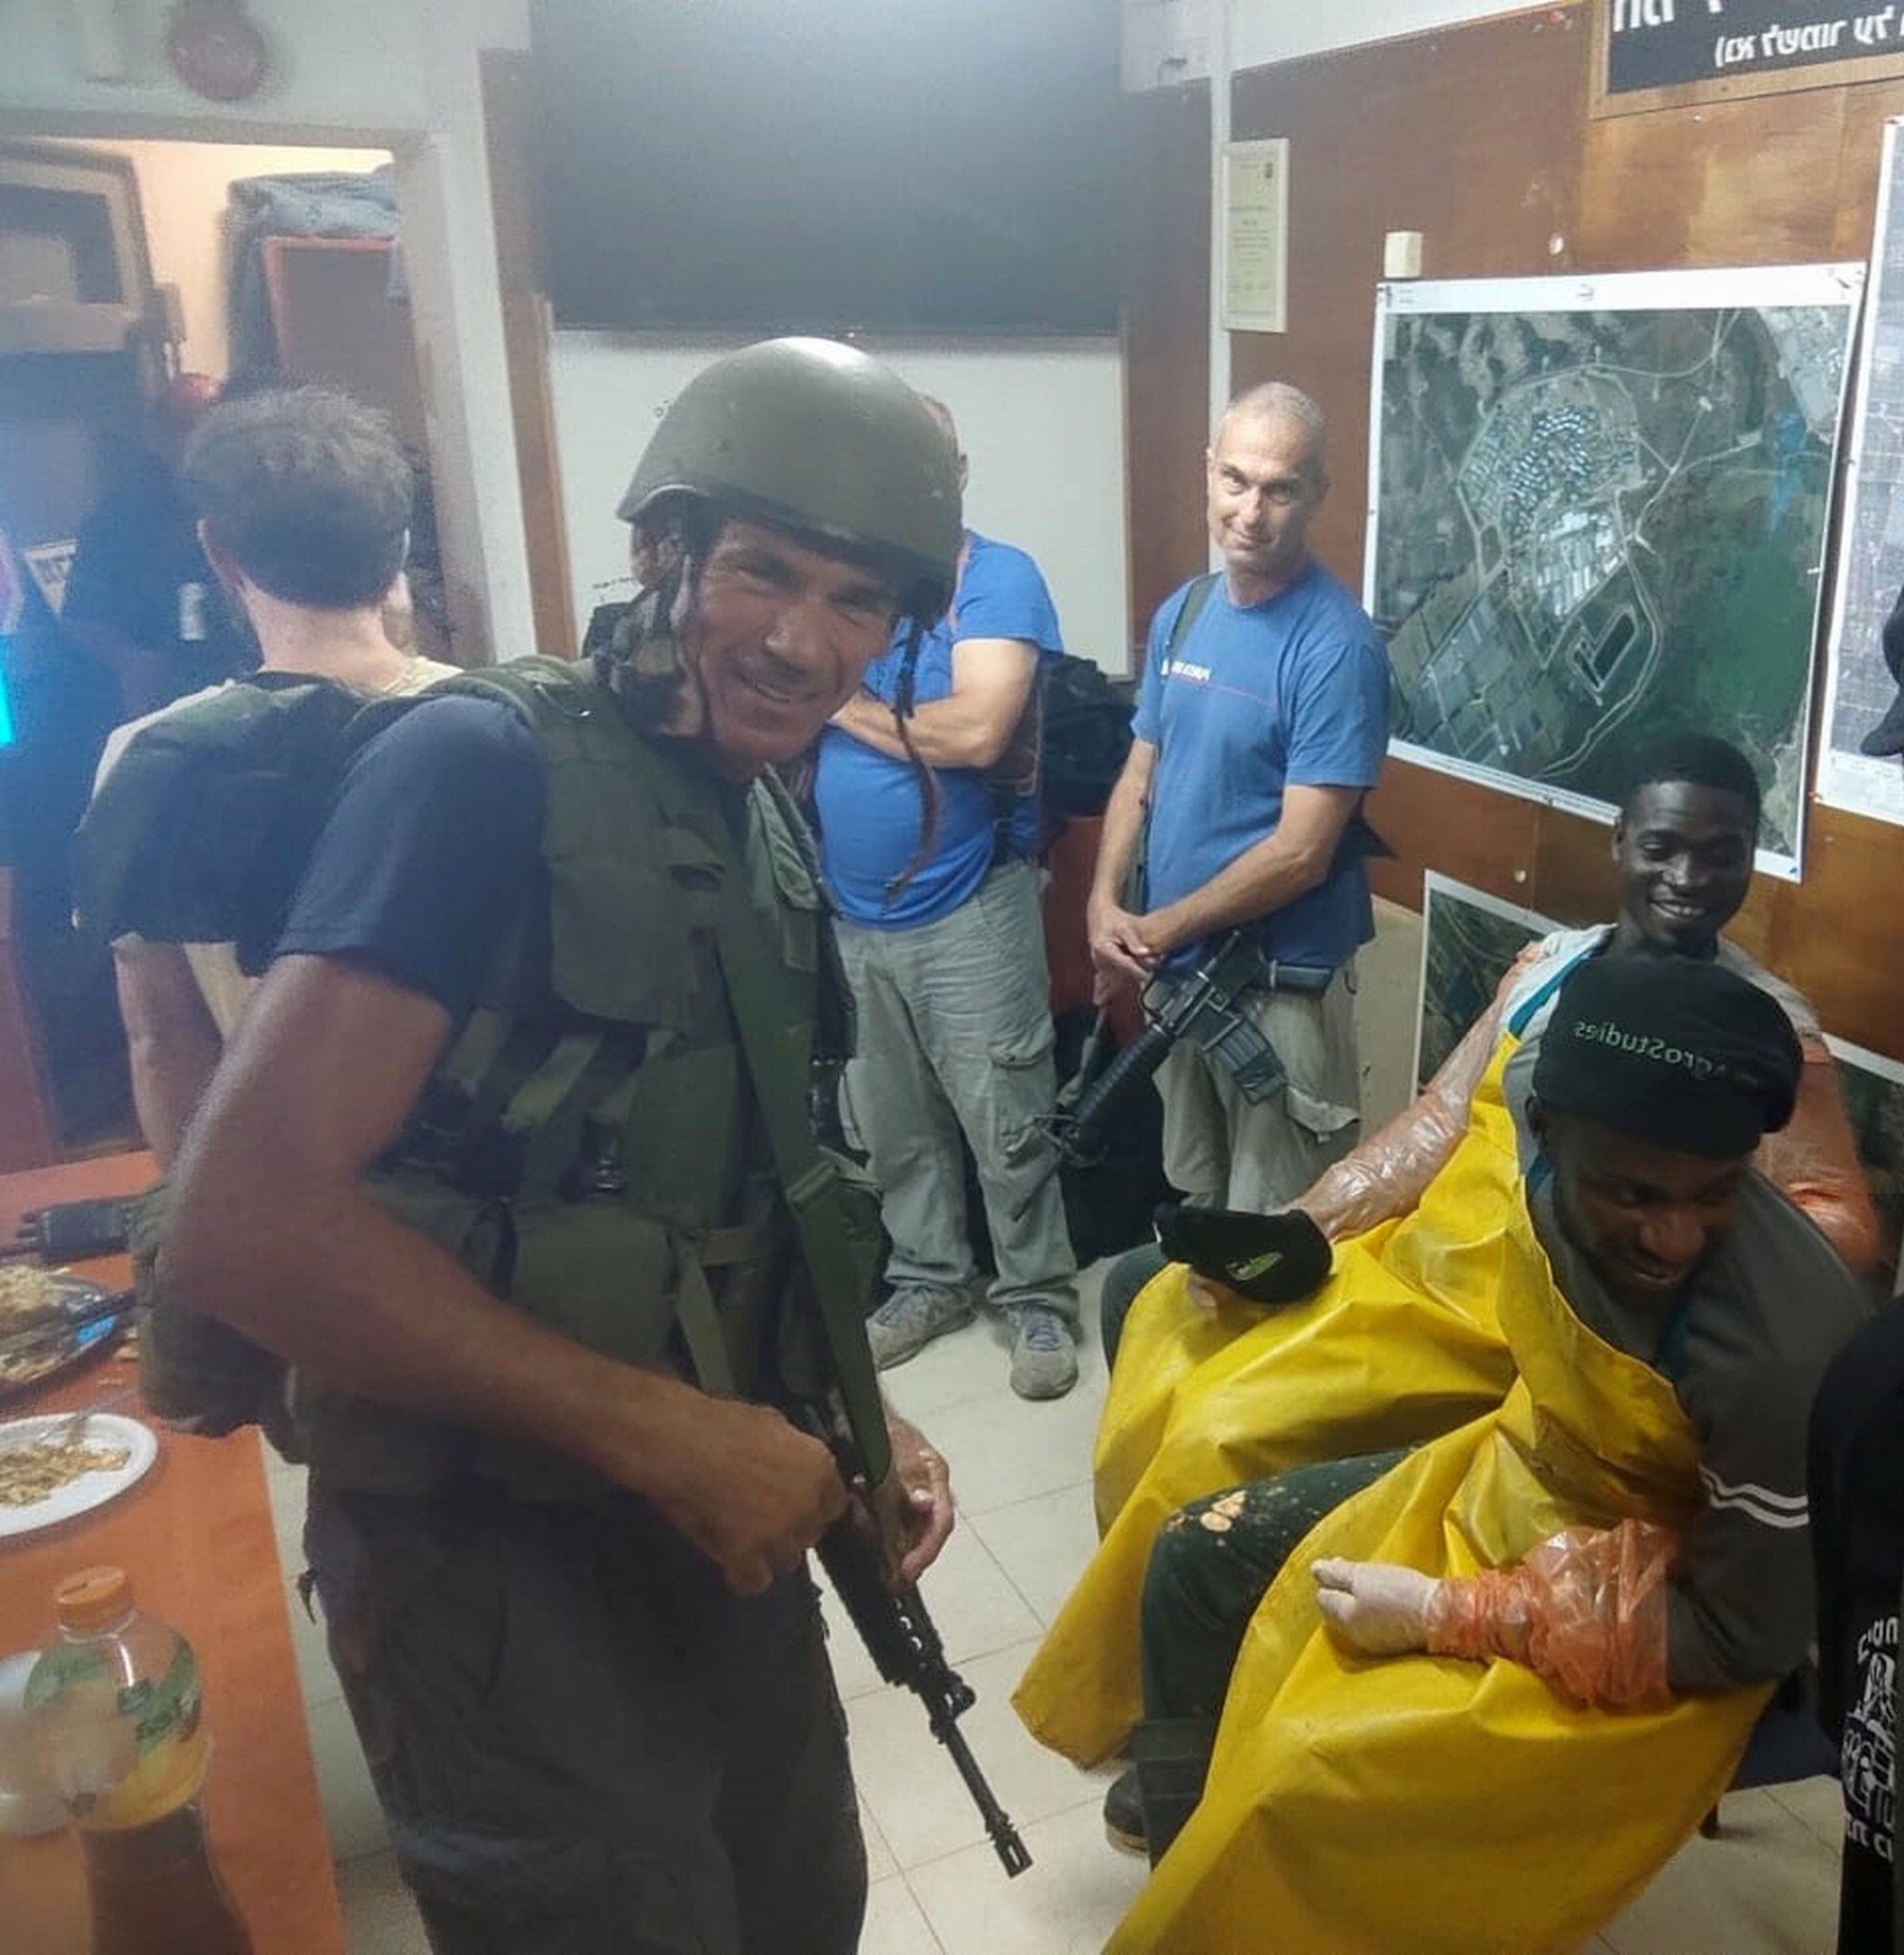 Gabo Altmark (in the blue shirt) along with other members of the Zikim civil guard and agricultural interns inside a safe room during a rocket alert. (Kwabena Frimpong)